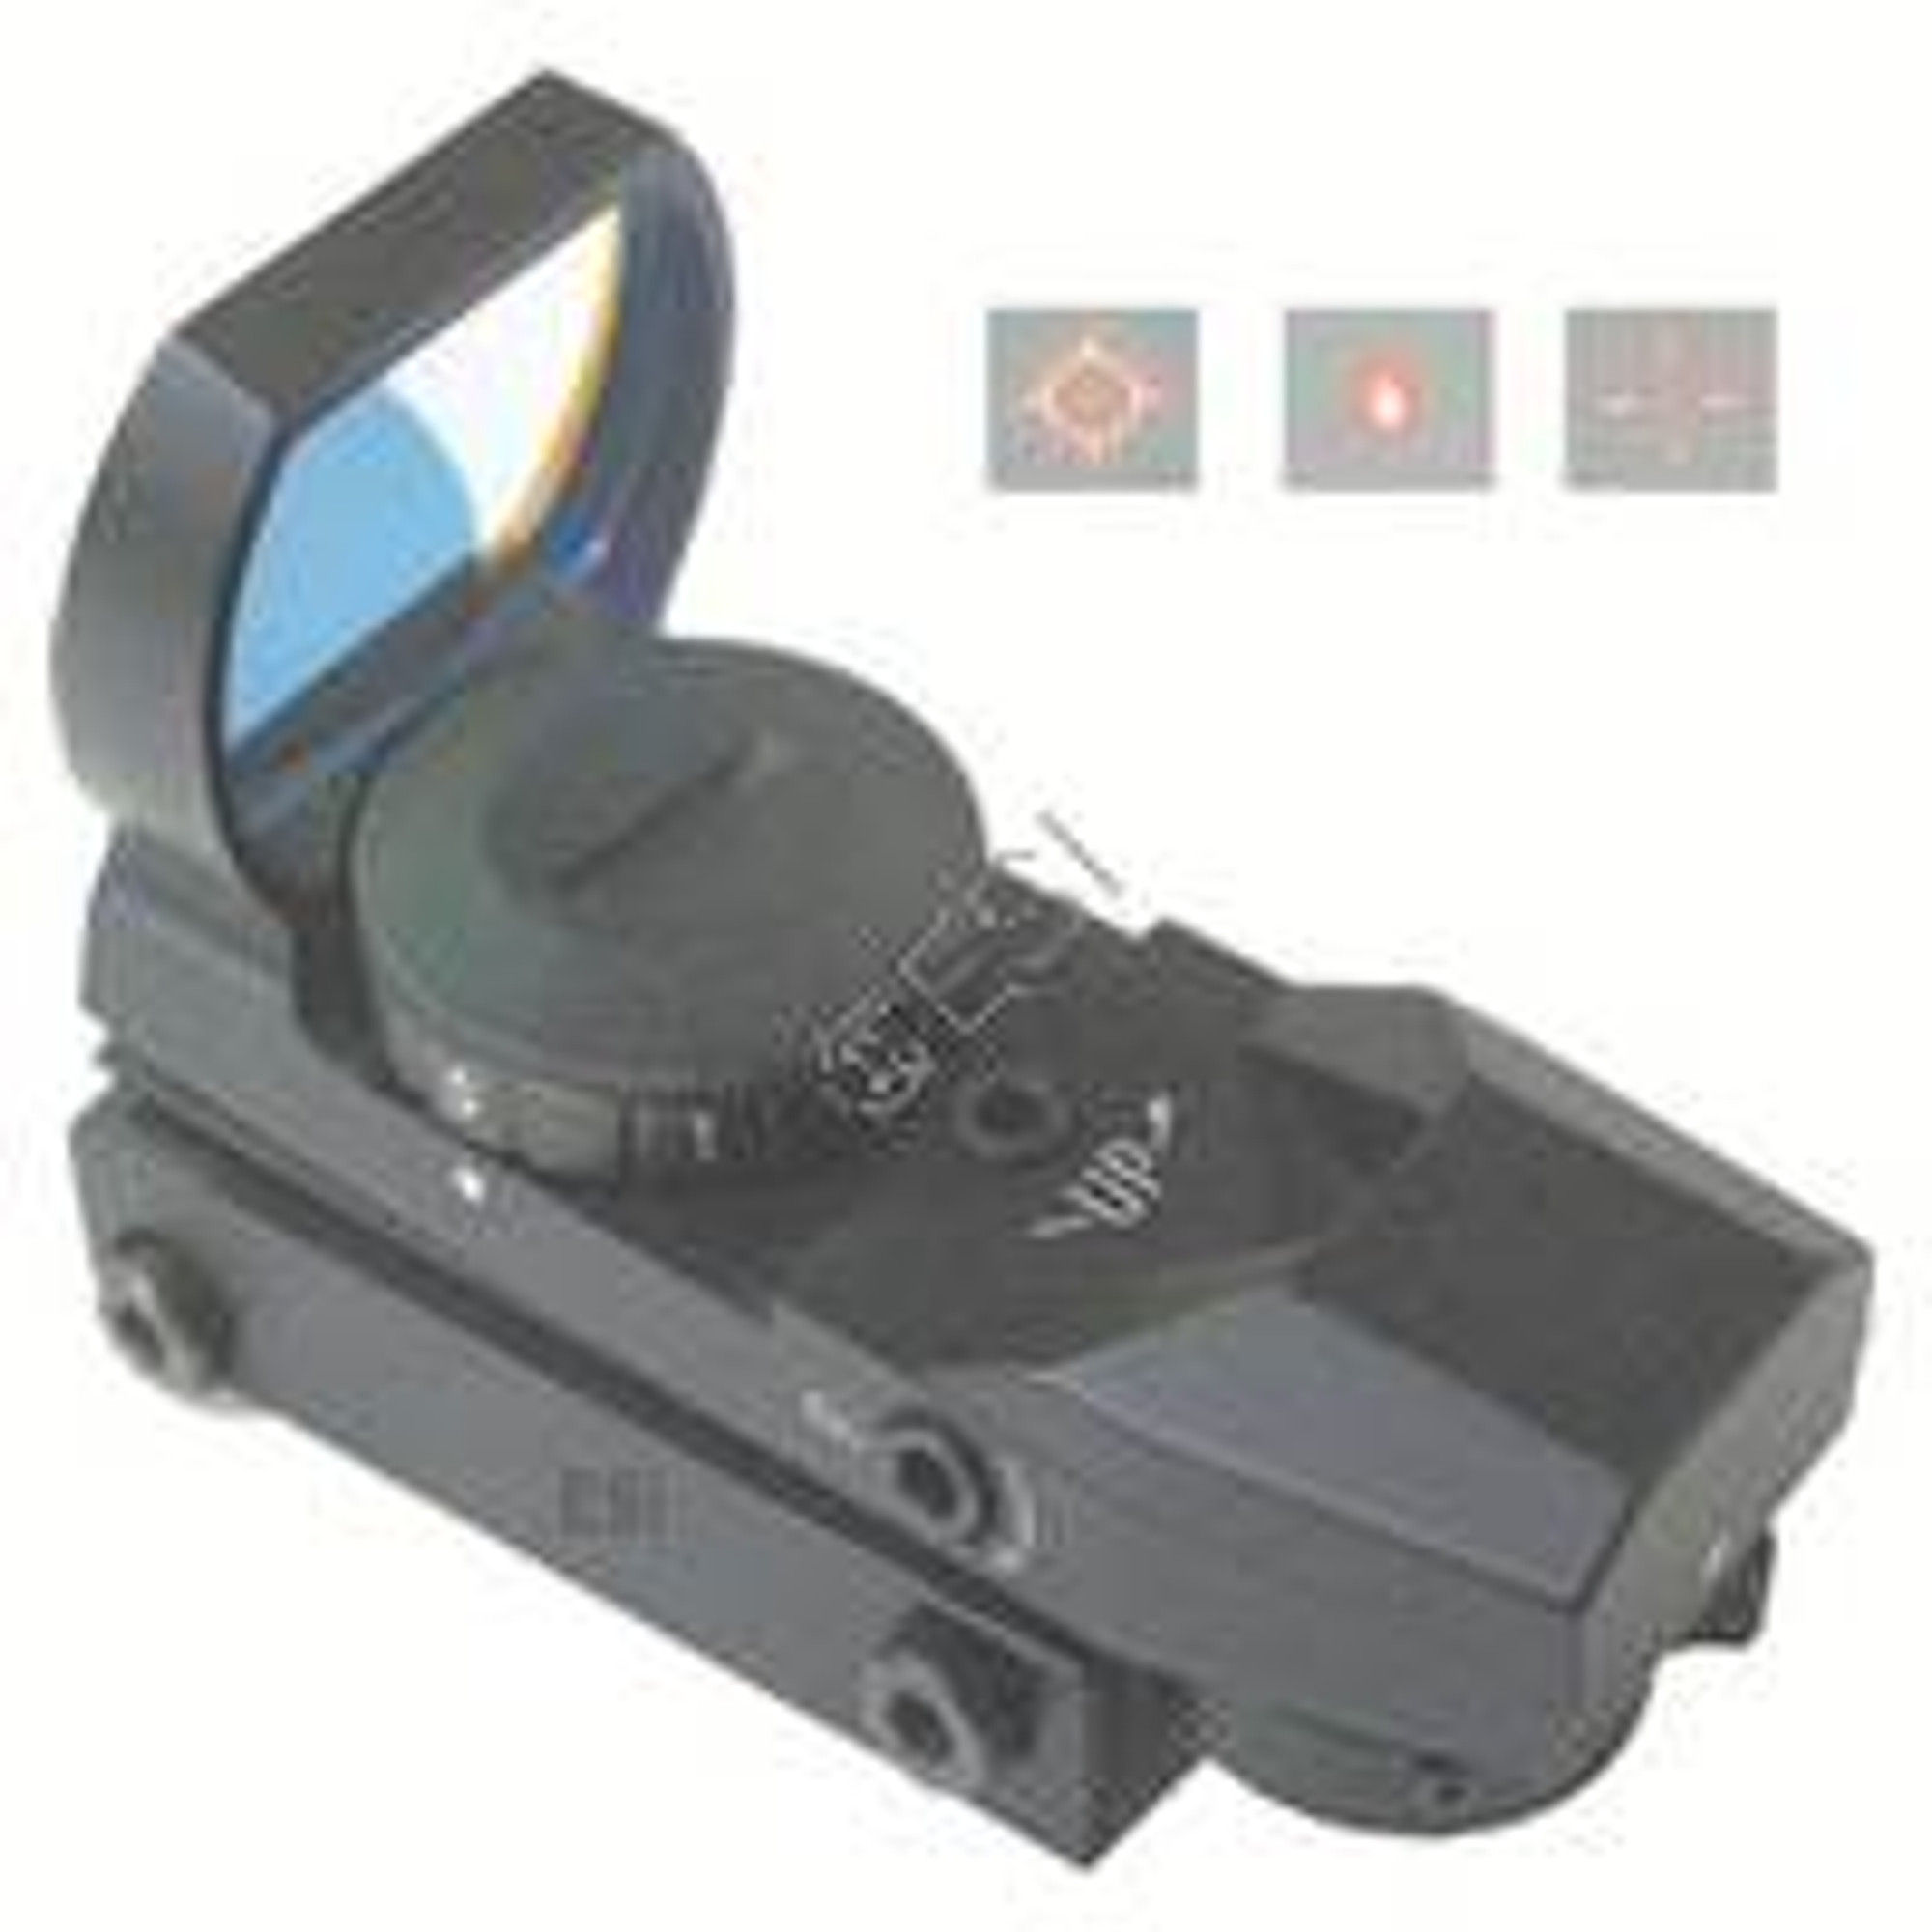 RAP4 Blade Holographic Red Dot Scope for 20mm Rail